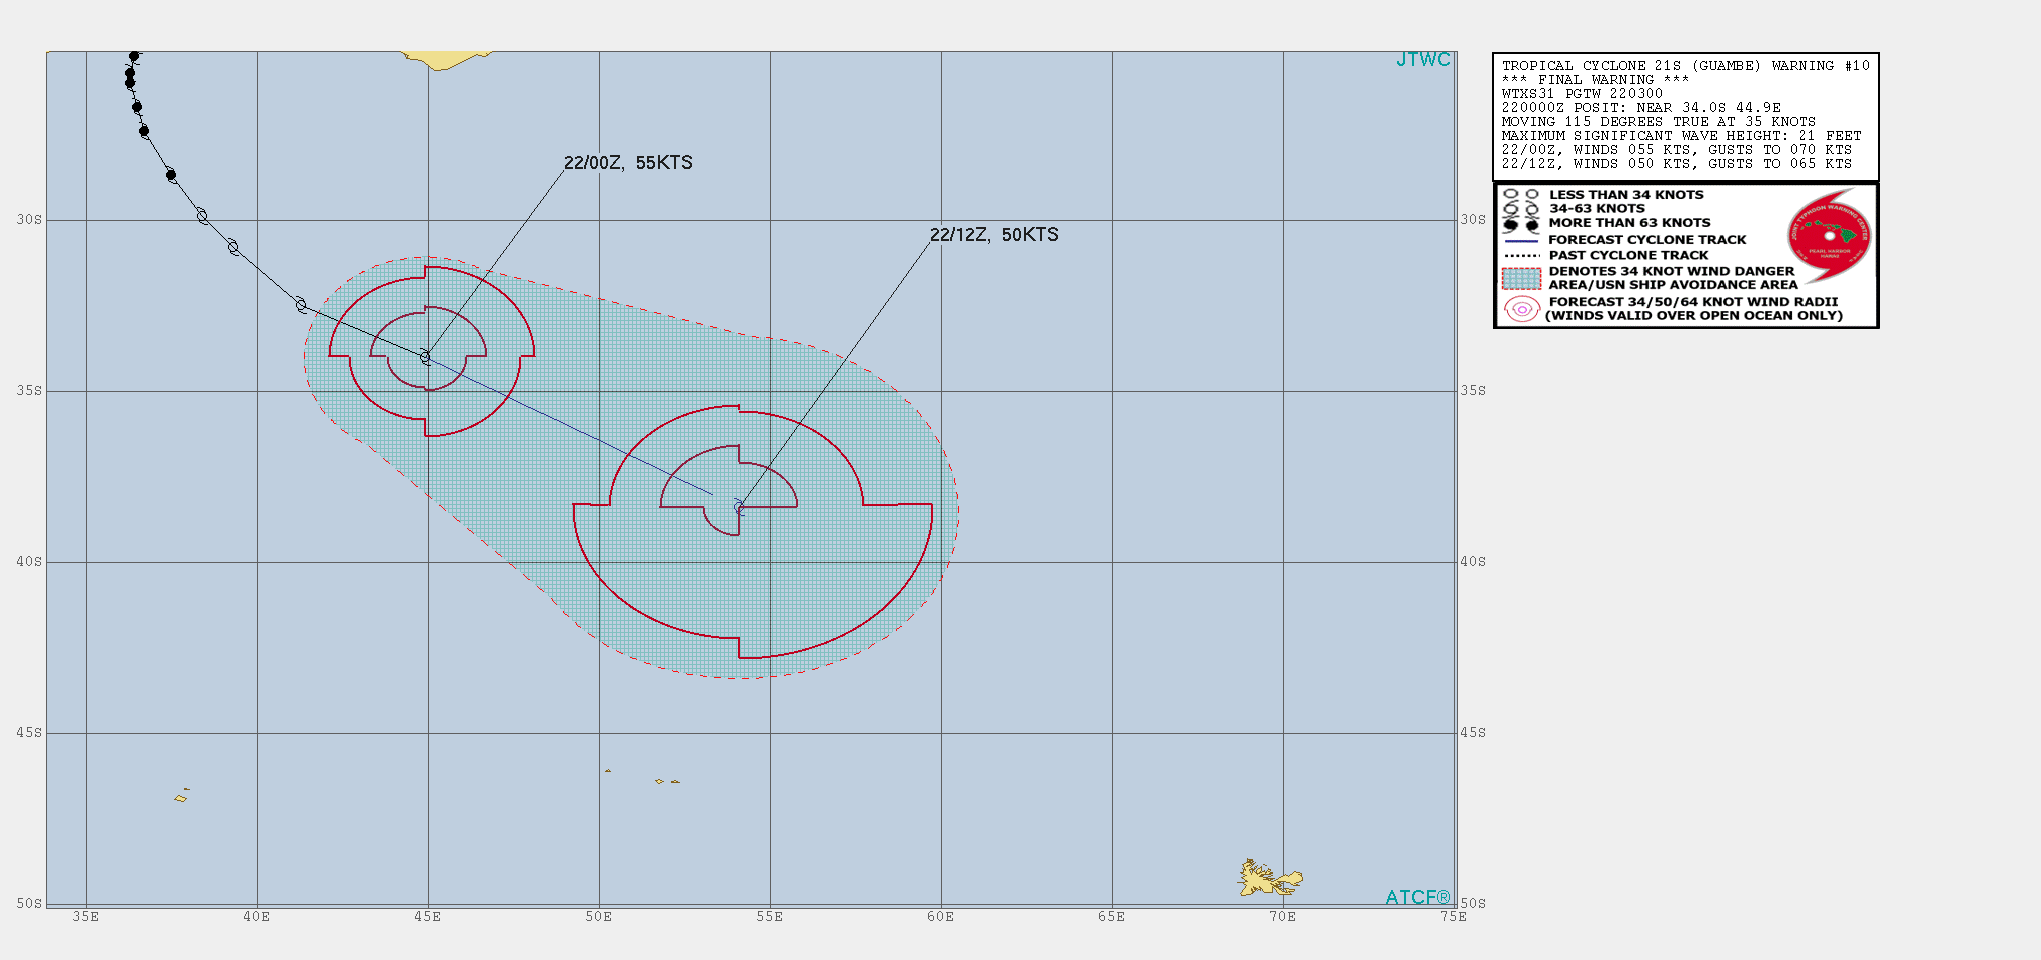 21S(GUAMBE). WARNING 10 ISSUED AT 22/03UTC.THE CURRENT POSITION IS SITUATED WITHIN A PARTIALLY-EXPOSED CENTER FEATURE EVIDENT IN 220000Z  INFRARED SATELLITE AND 220056Z SSMIS 91 GHZ IMAGERY. THE INTENSITY  IS CONSISTENT WITH TIME-LATE ASCAT DATA FROM AROUND 211800Z, WHICH  INDICATED AN INTENSITY AROUND OR SLIGHTLY HIGHER THAN 55 KNOTS. TC  21S IS RAPIDLY ACCELERATING INTO THE WESTERLY FLOW PATTERN AS IT  MERGERS WITH A MID-LATITUDE TROUGH. FOLLOWING A RAPID TRANSITION,  21S NOW FULLY EXTRATROPICAL. THE SYSTEM WILL CONTINUE TO MOVE  RAPIDLY EAST-SOUTHEASTWARD AS A STORM FORCE LOW WITH BAROCLINIC  SUPPORT DURING THE 12-HOUR FORECAST PERIOD. THIS IS THE FINAL  WARNING ON THIS SYSTEM BY THE JOINT TYPHOON WRNCEN PEARL HARBOR HI.